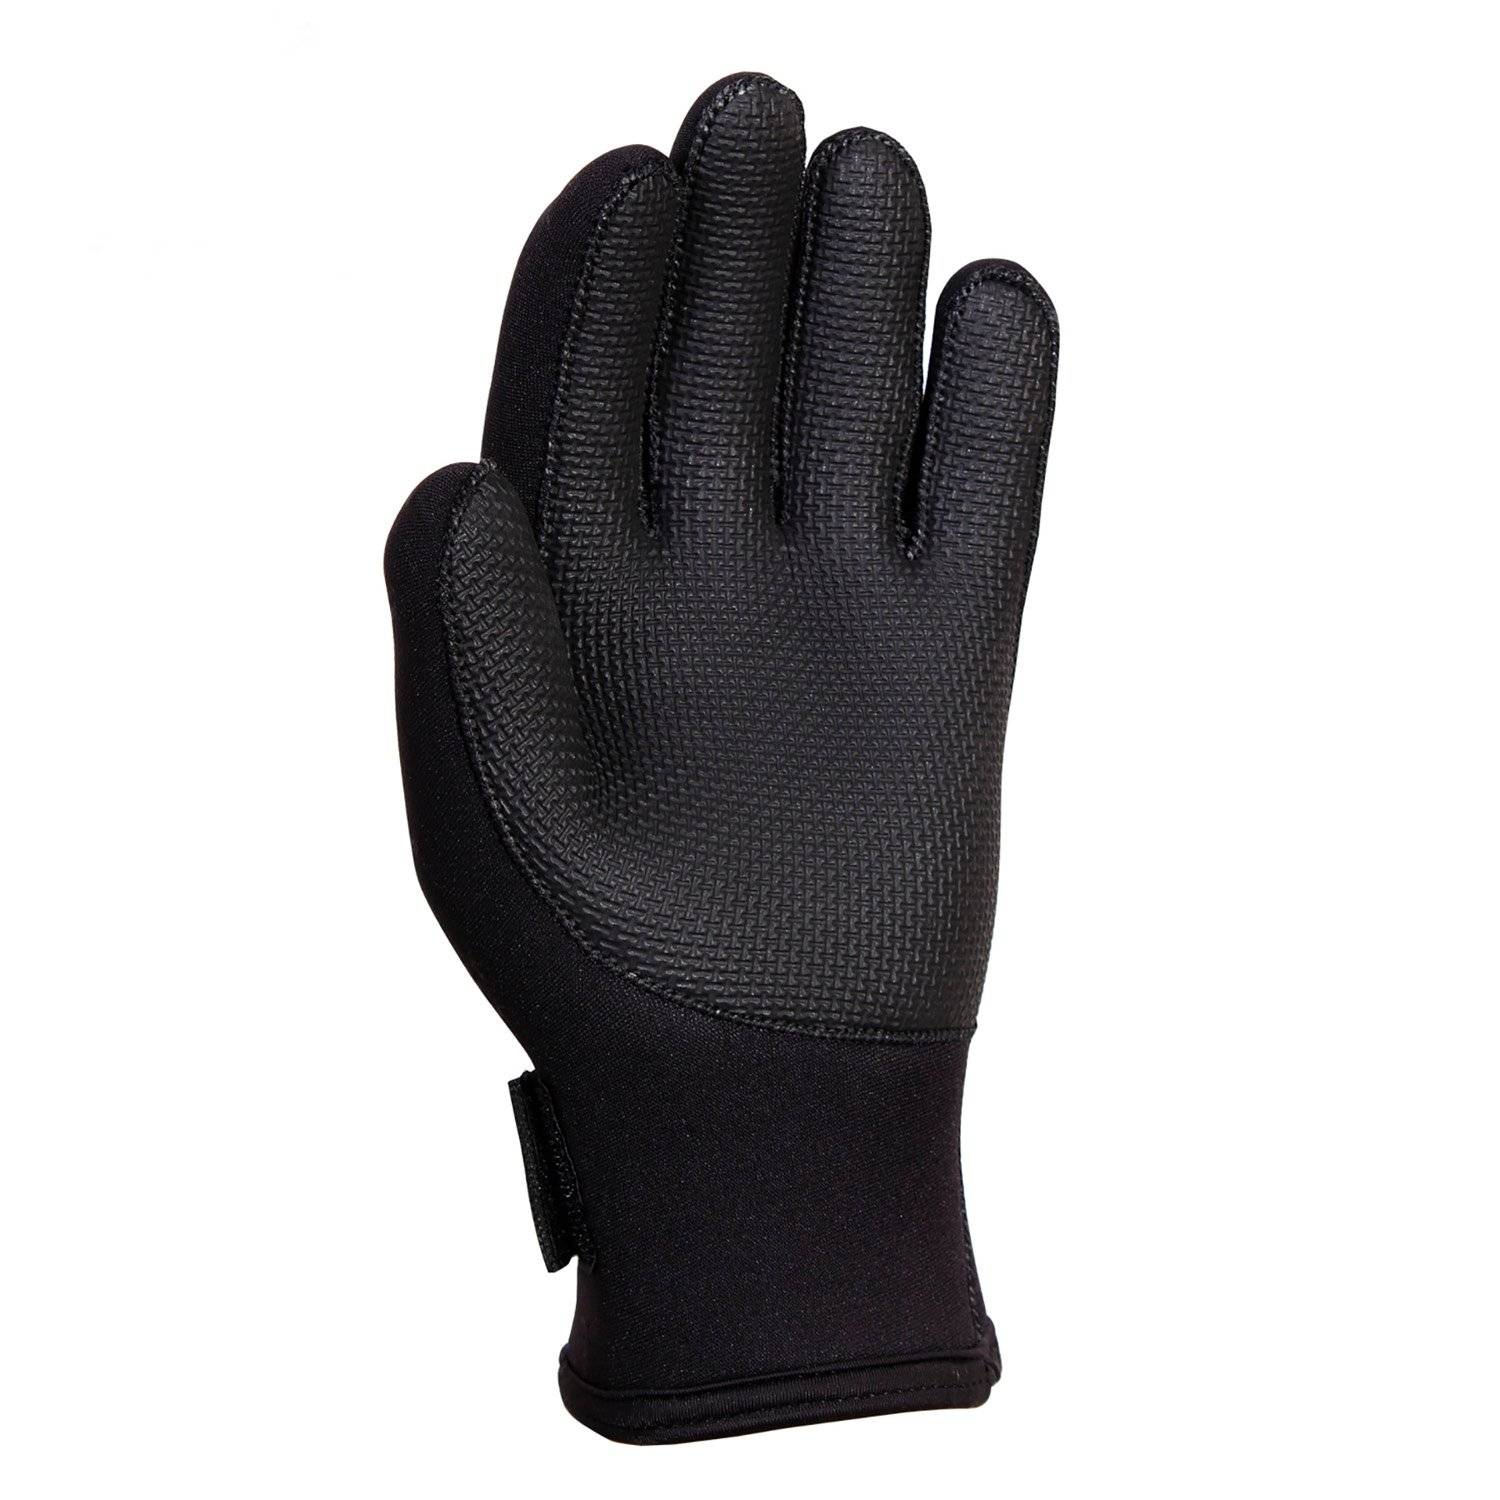 Rothco Black Waterproof Cold Weather Neoprene Gloves-L